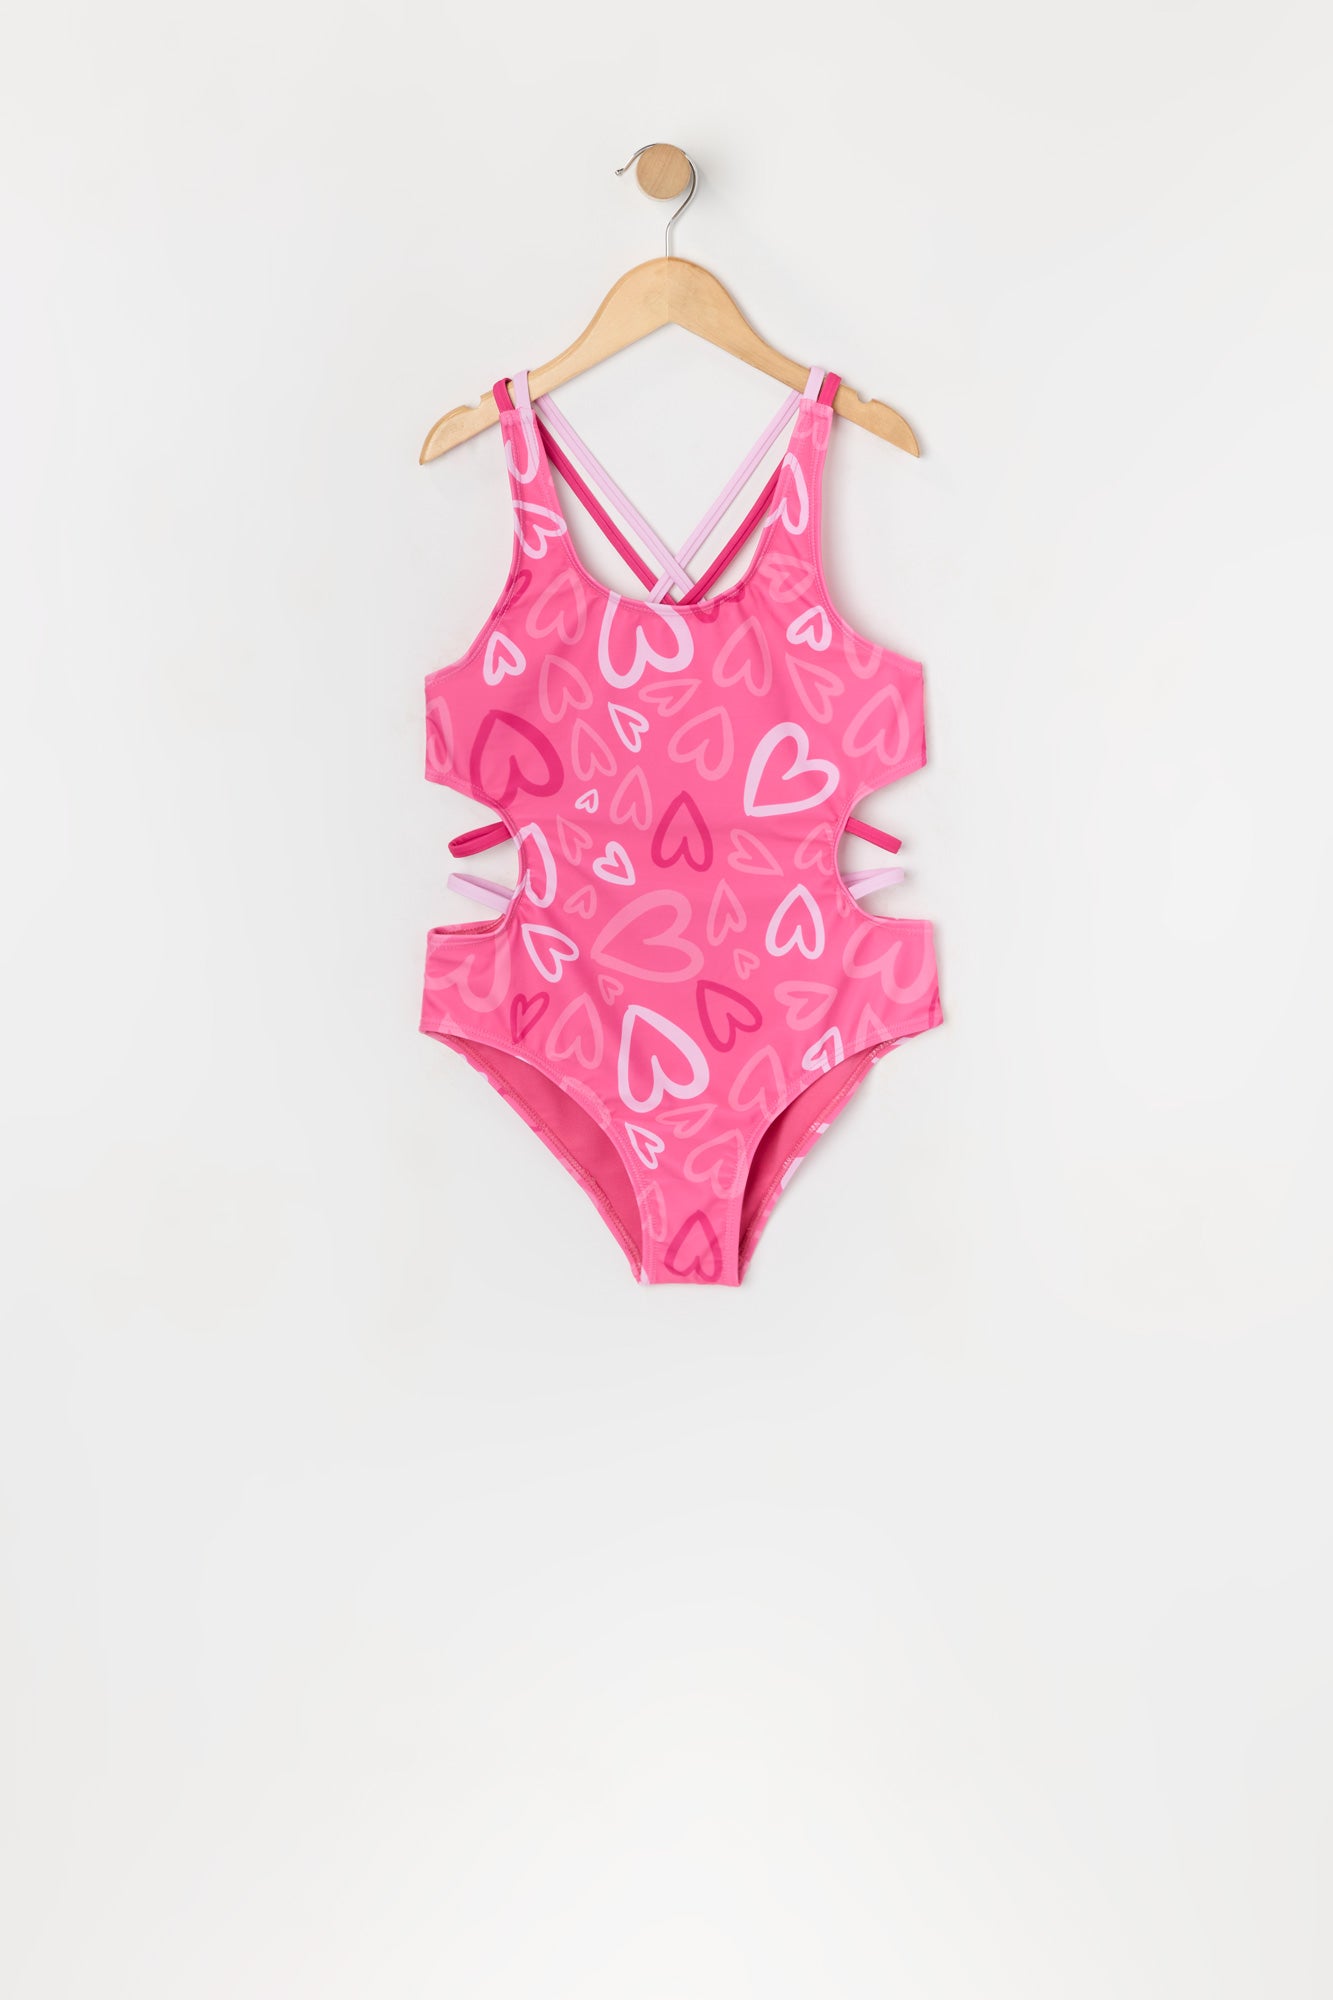 Girls Heart Print Strappy One Piece Swimsuit with built-in cups